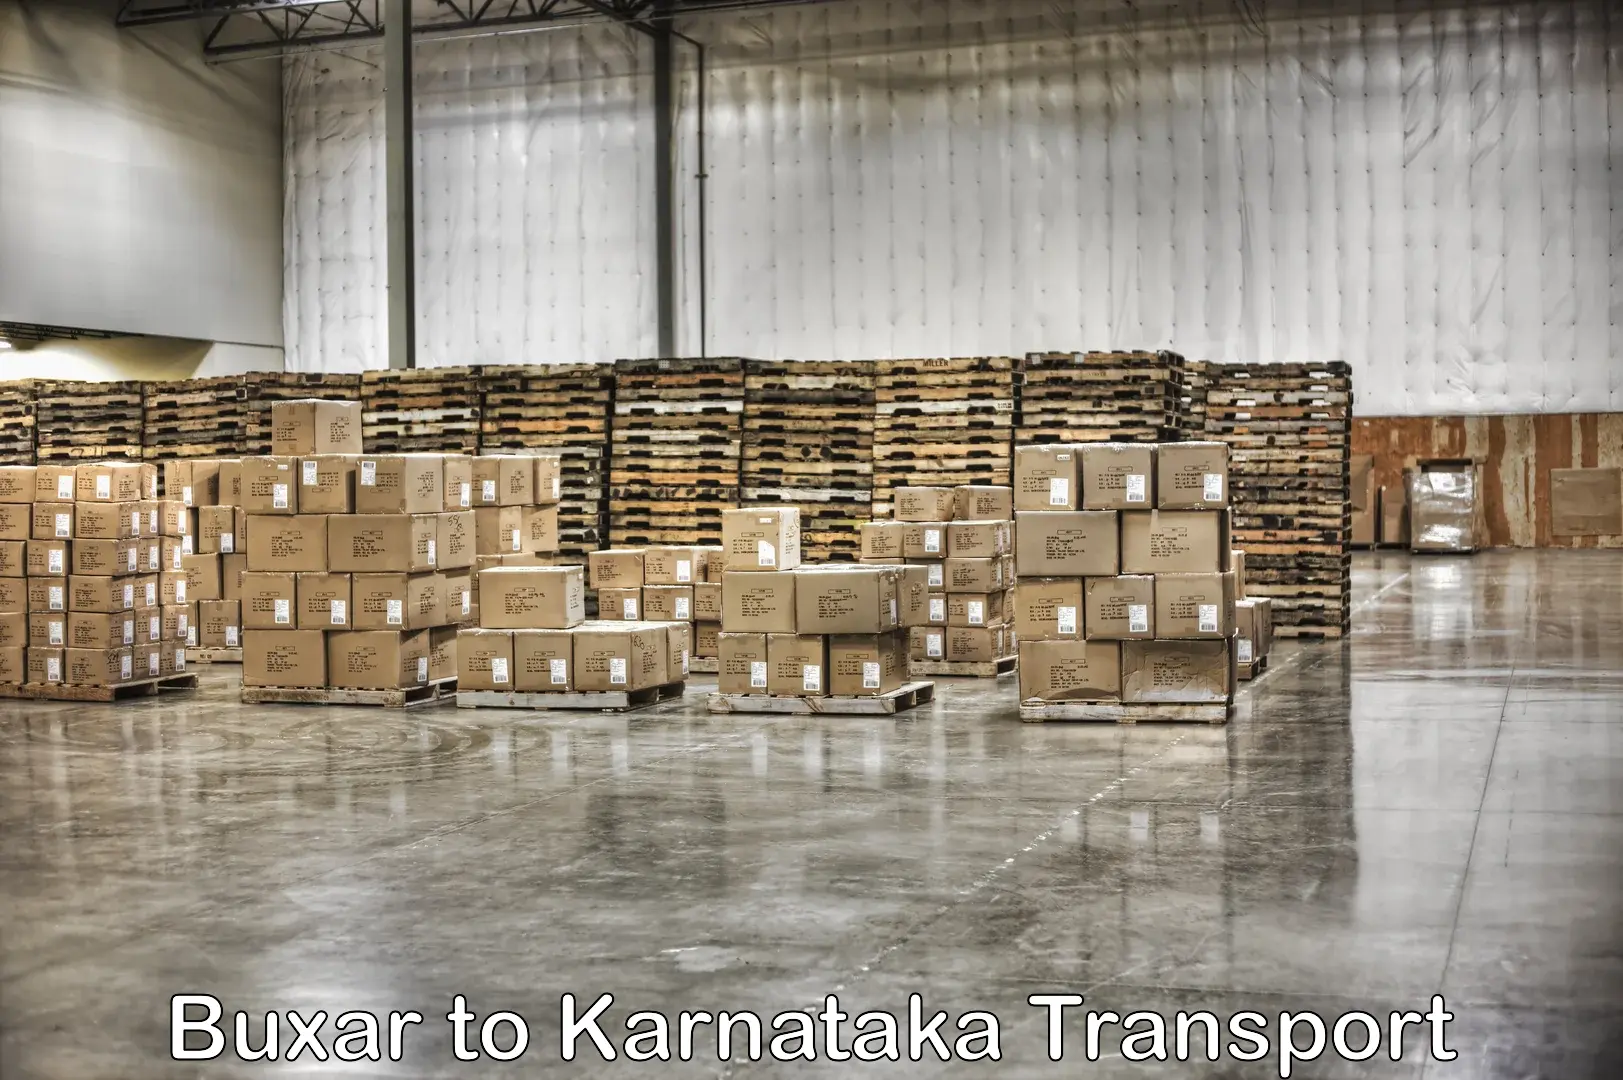 Truck transport companies in India in Buxar to Hangal